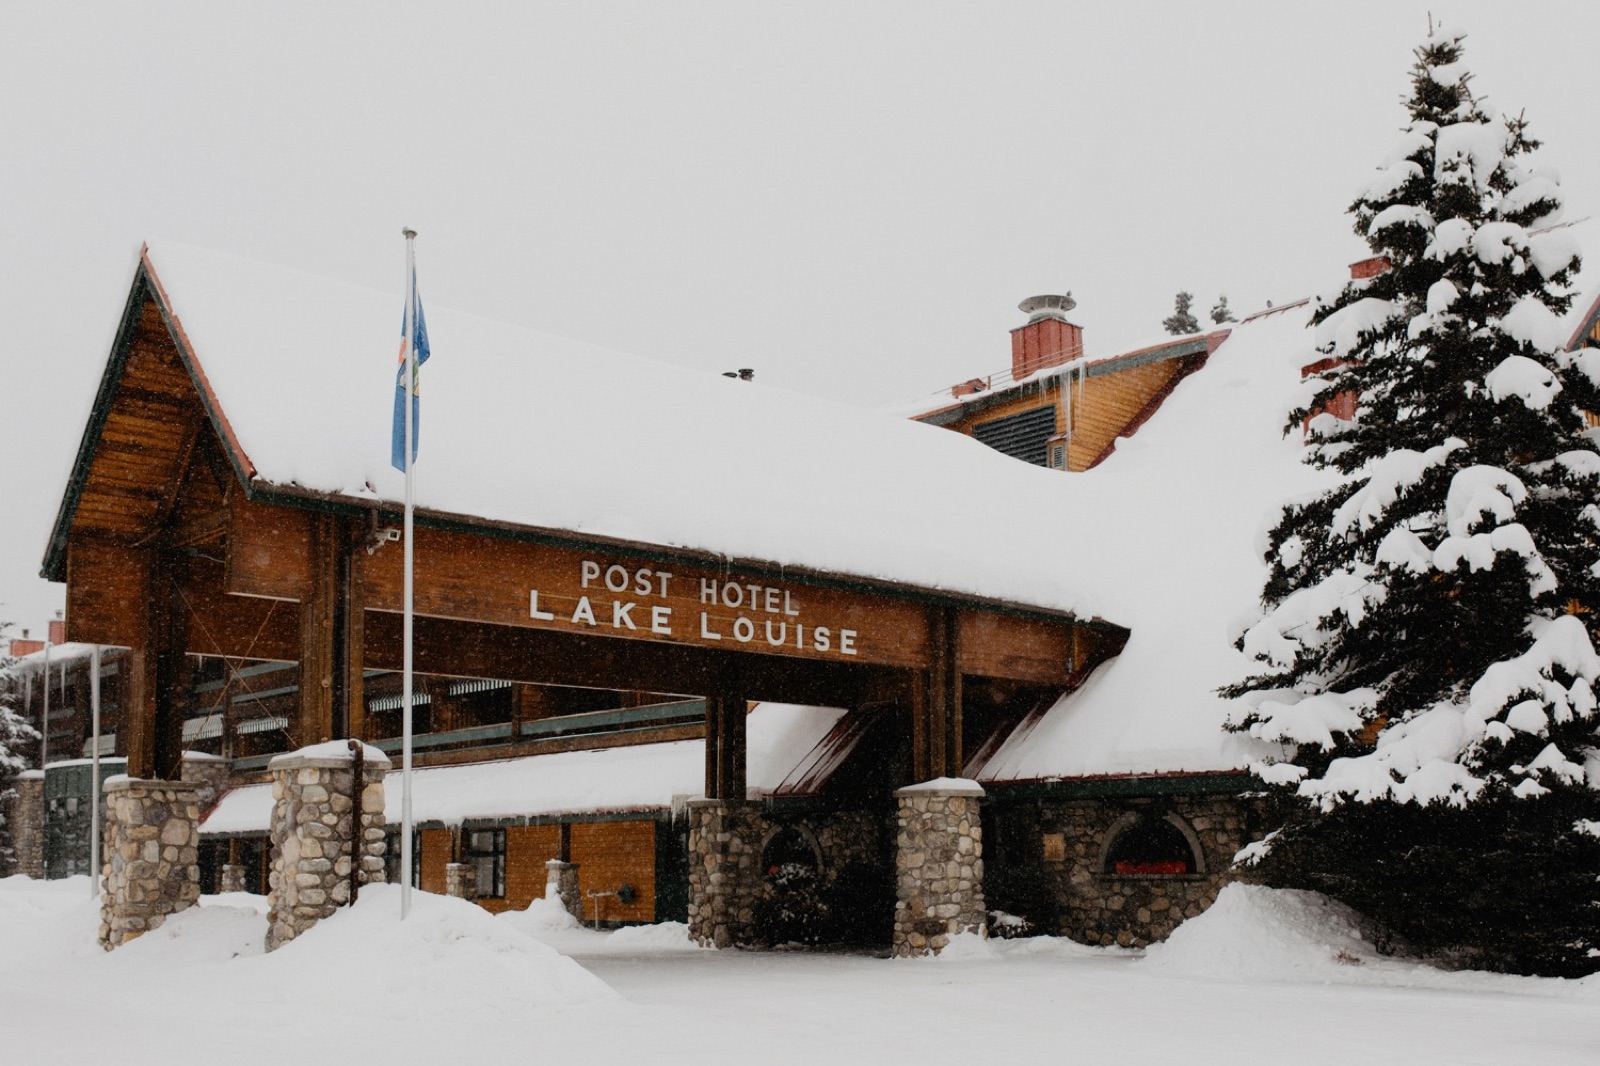 Exterior of the Post Hotel in Lake Louise in winter